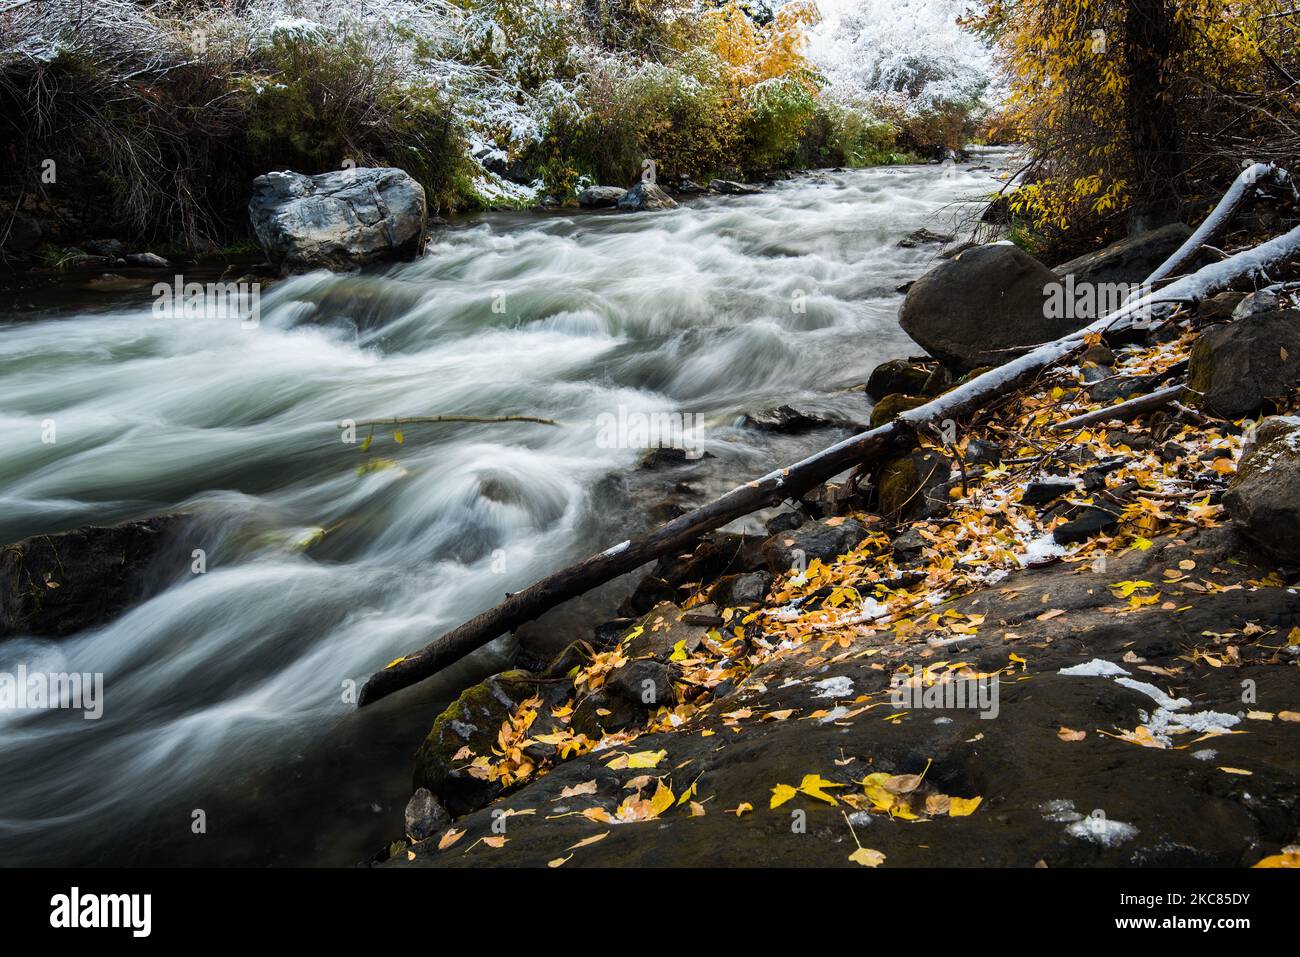 Lower Provo River and autumn foliage.  The river is located east of Provo, Utah, USA.  it is a popular destination for fly fishermen and river raft. Stock Photo